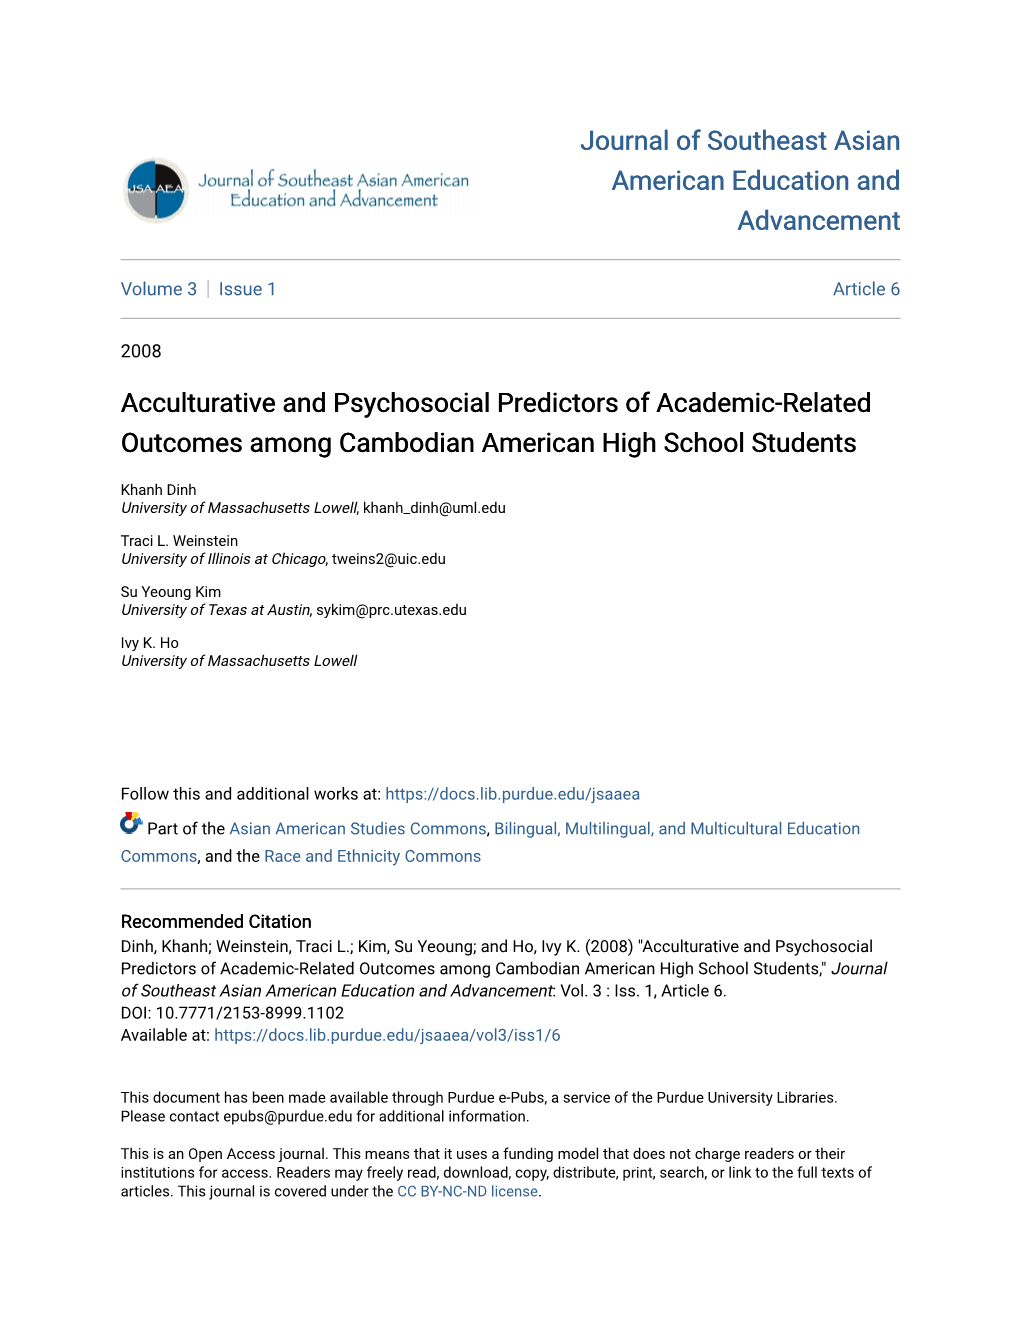 Acculturative and Psychosocial Predictors of Academic-Related Outcomes Among Cambodian American High School Students